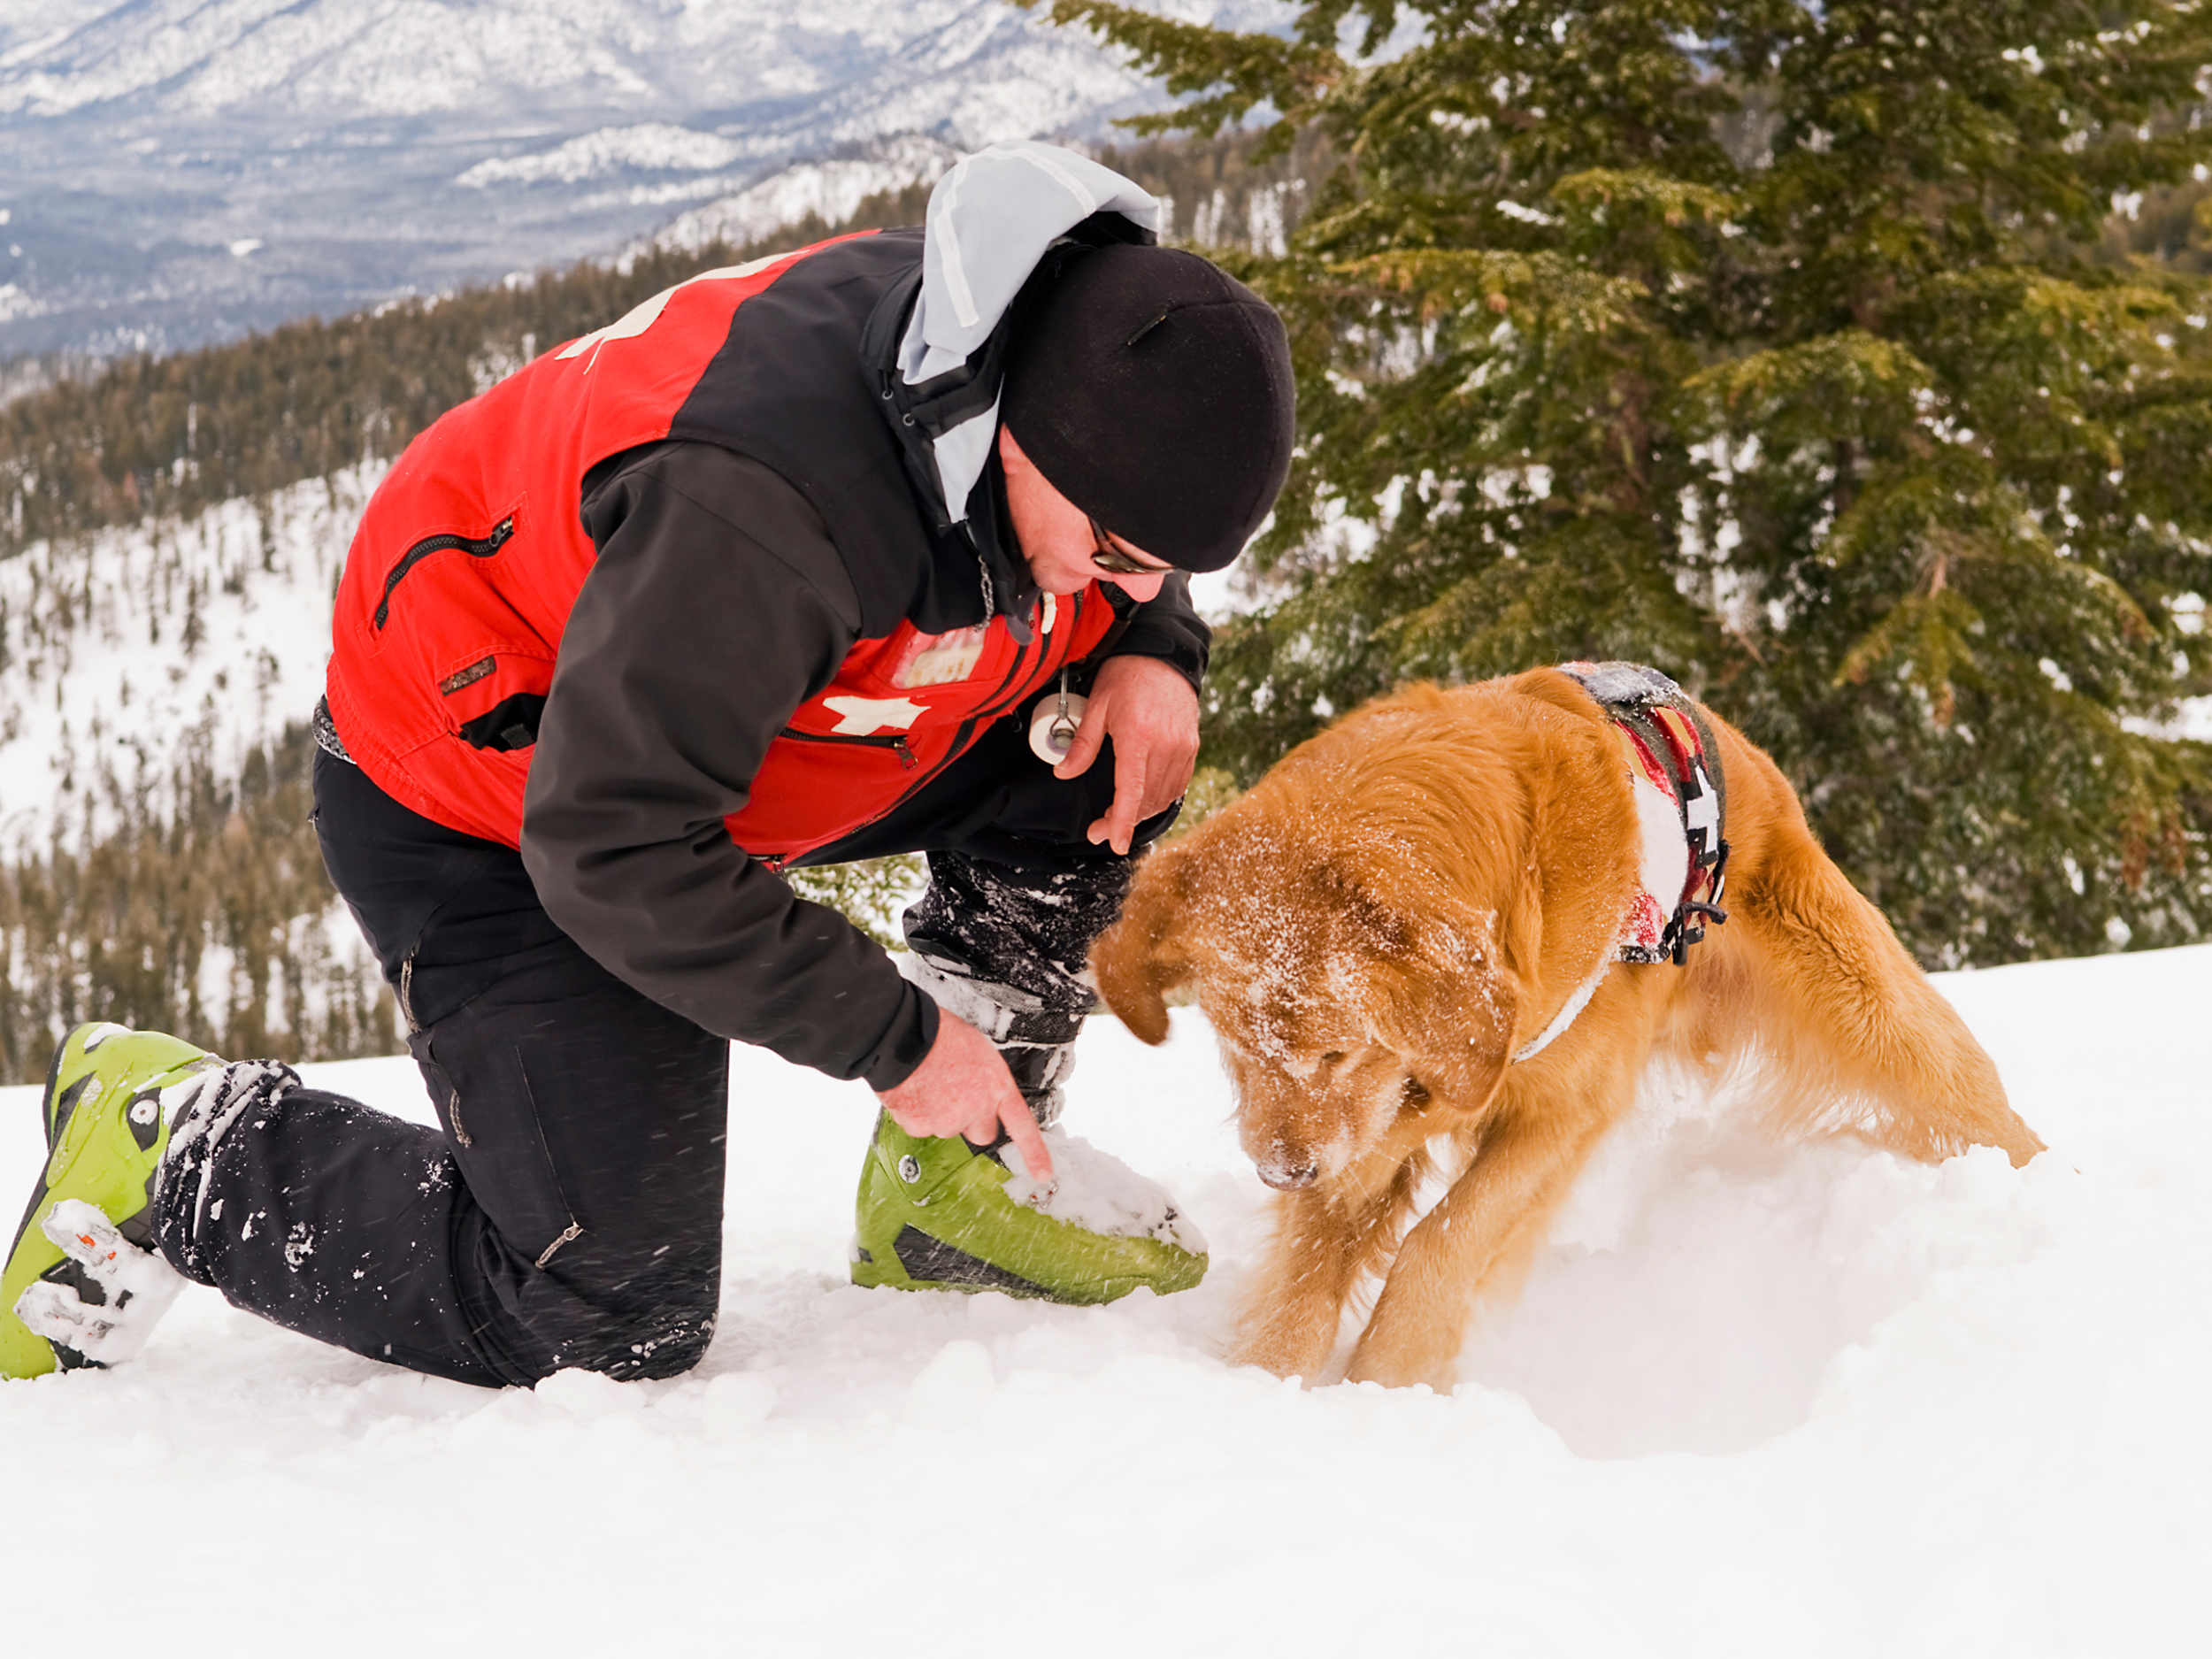 Photo: A Golden Retriever digs on a search and rescue mission in the mountains.